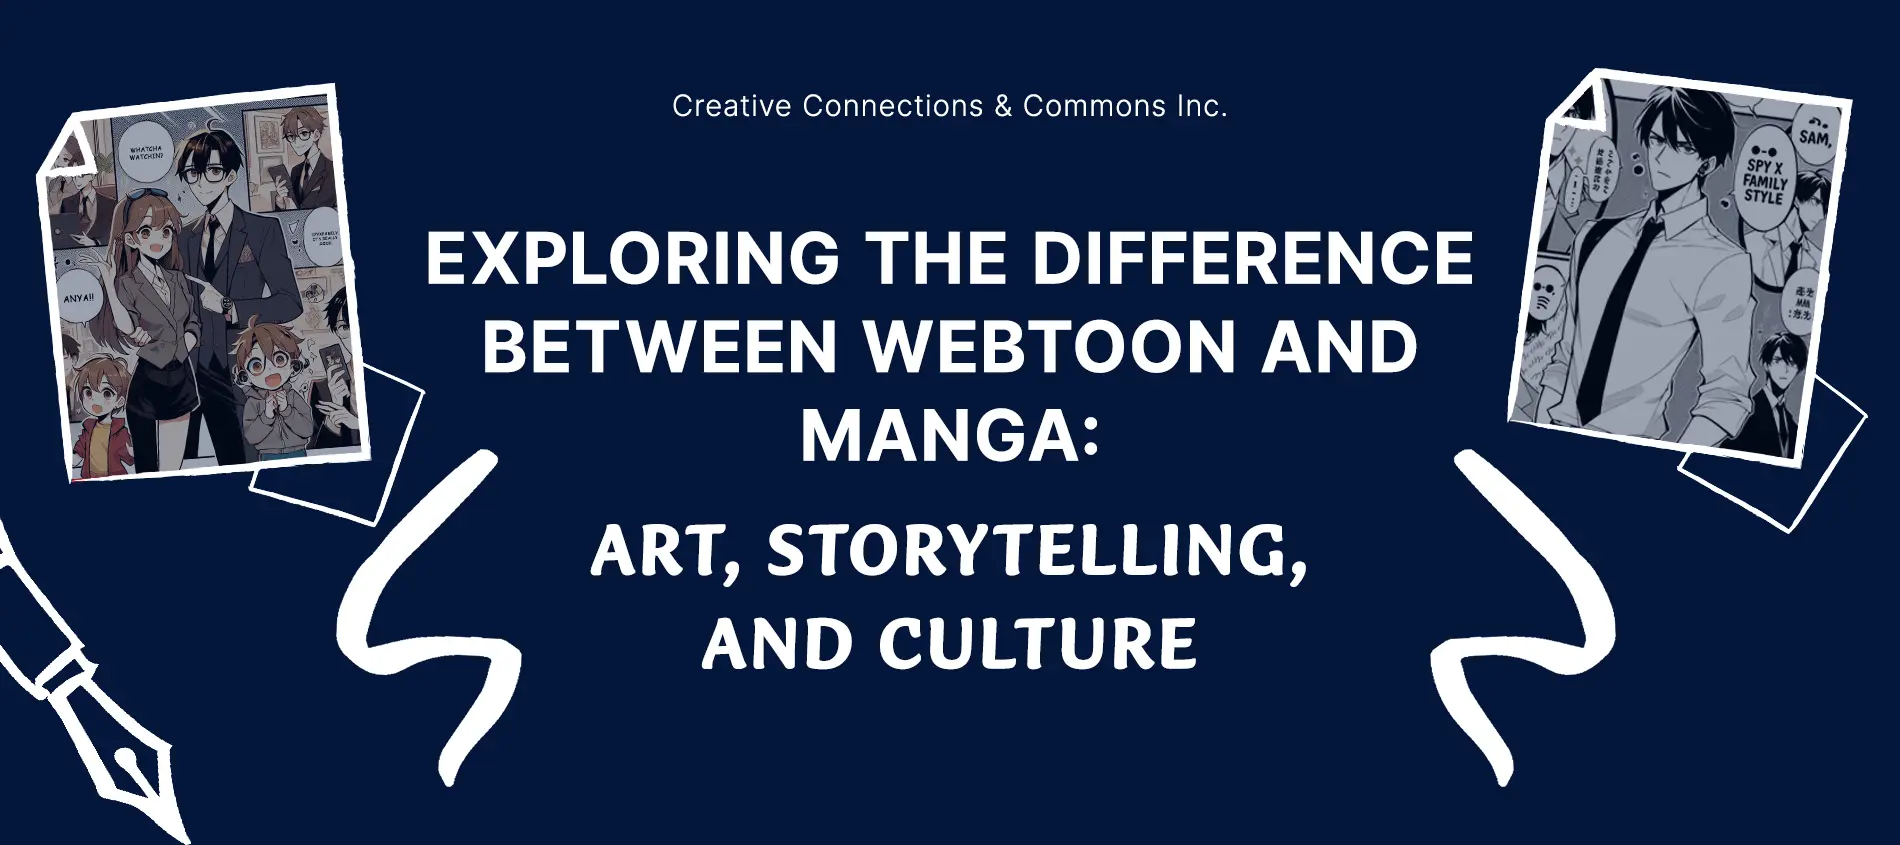 Exploring the Difference Between Webtoon and Manga Art Storytelling and Culture